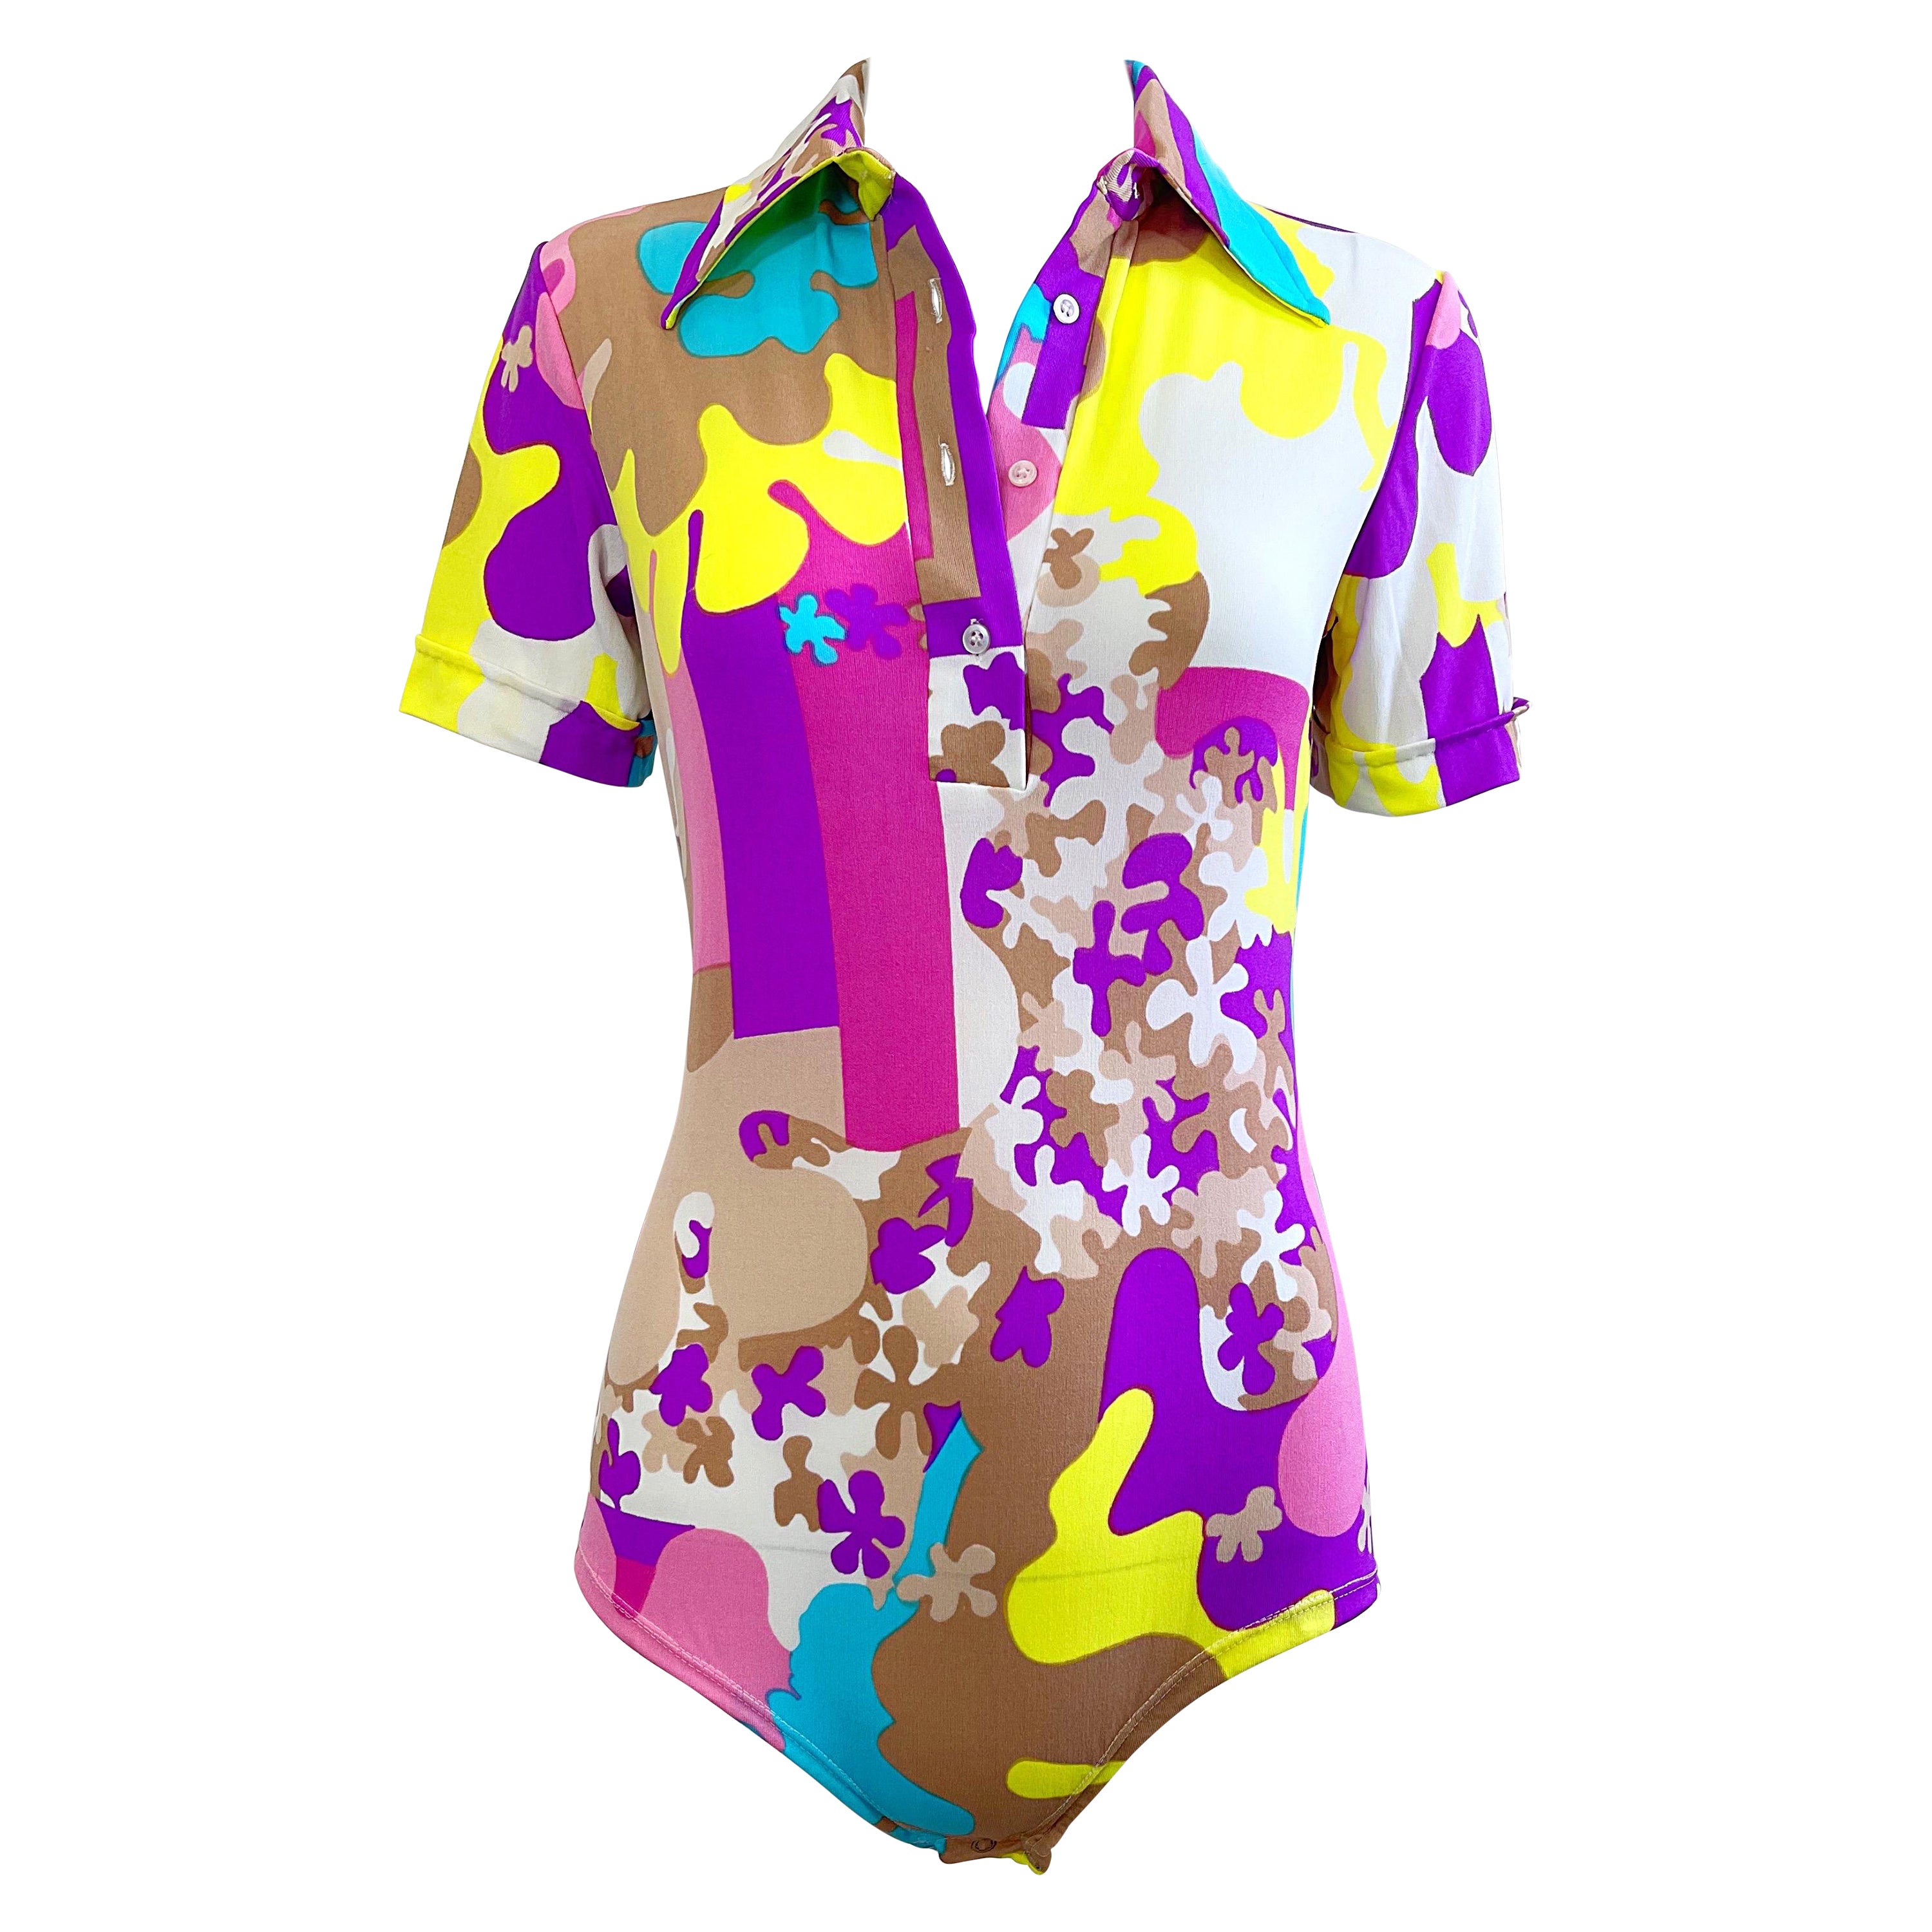 Amazing 1970s Bright Colored Novelty Puzzle Print One Piece Vintage 70s Bodysuit For Sale